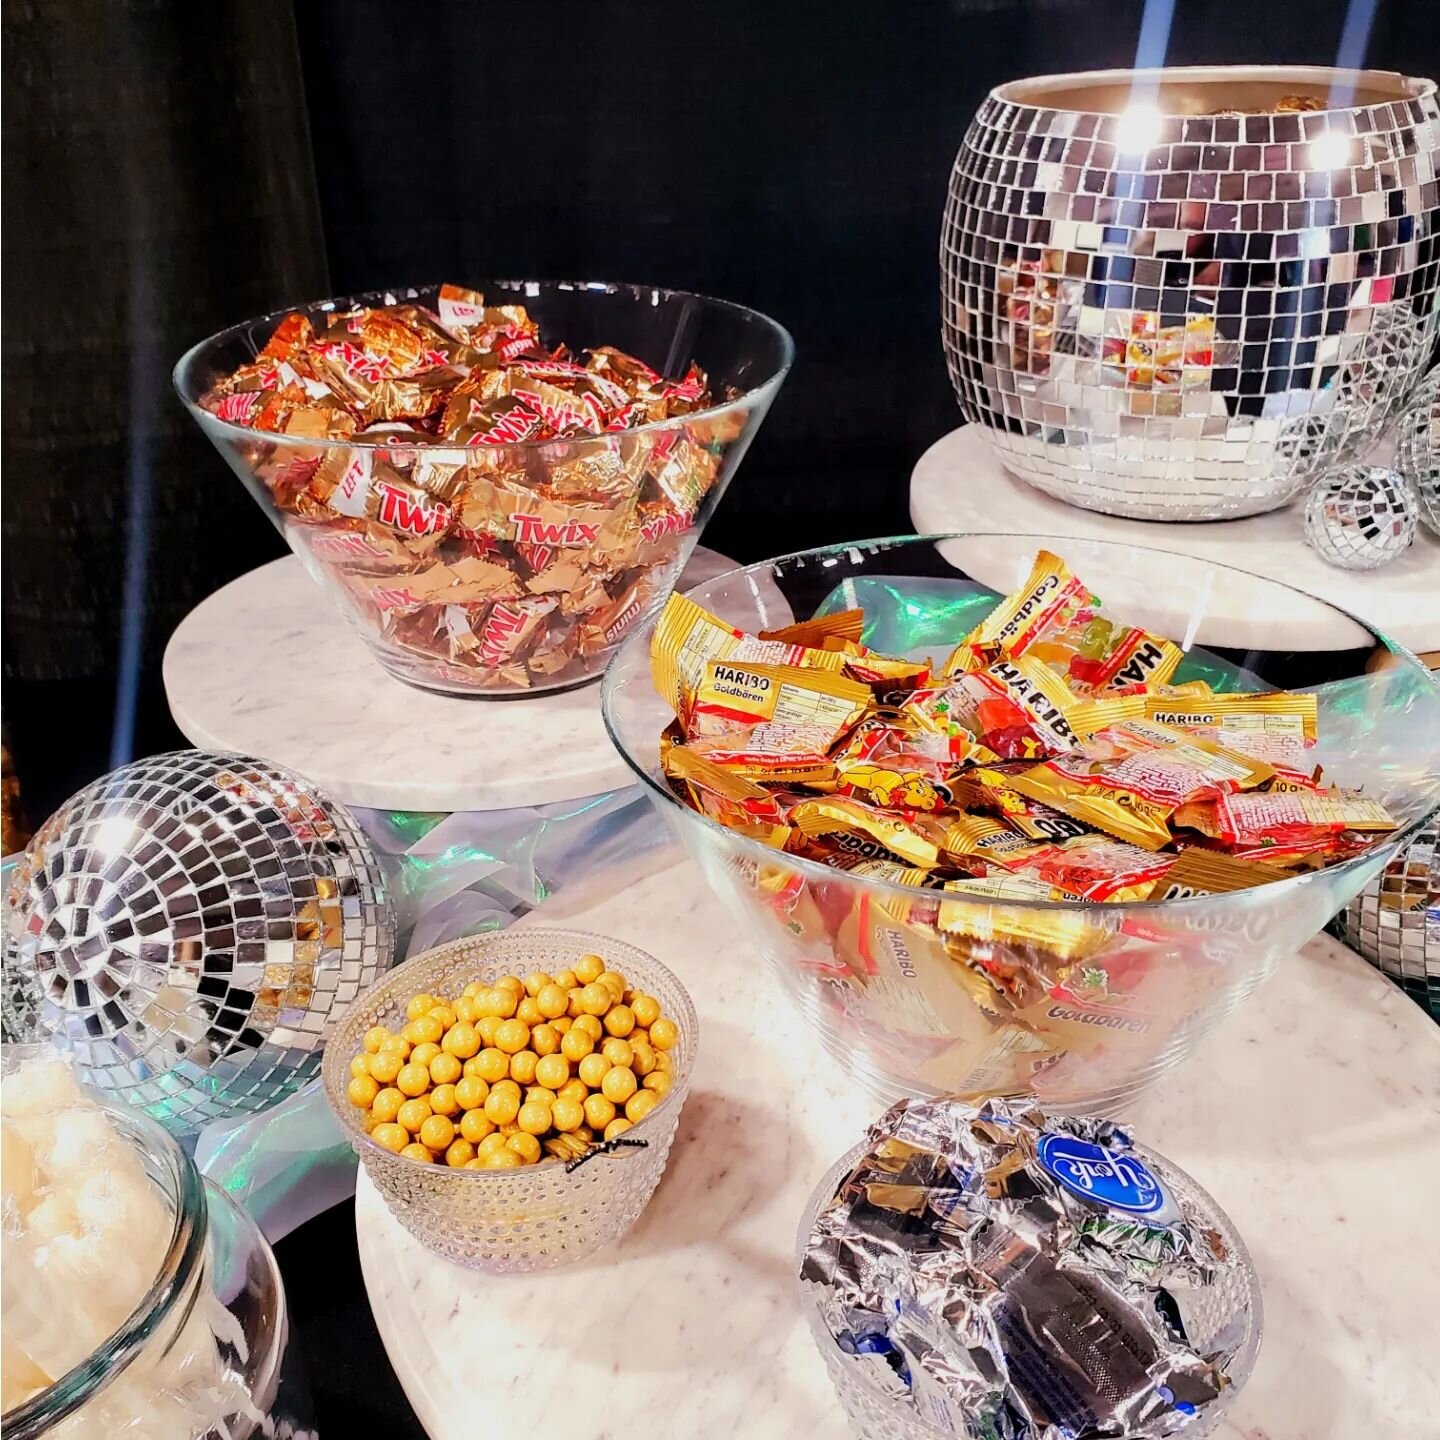 Introducing sweet treat displays!
Just launched at the Wed Plan Madison Show last weekend, Sugarsmith will now be offering completely customizable candy and treat displays for weddings, showers, birthdays and more! Send us a message for more info!